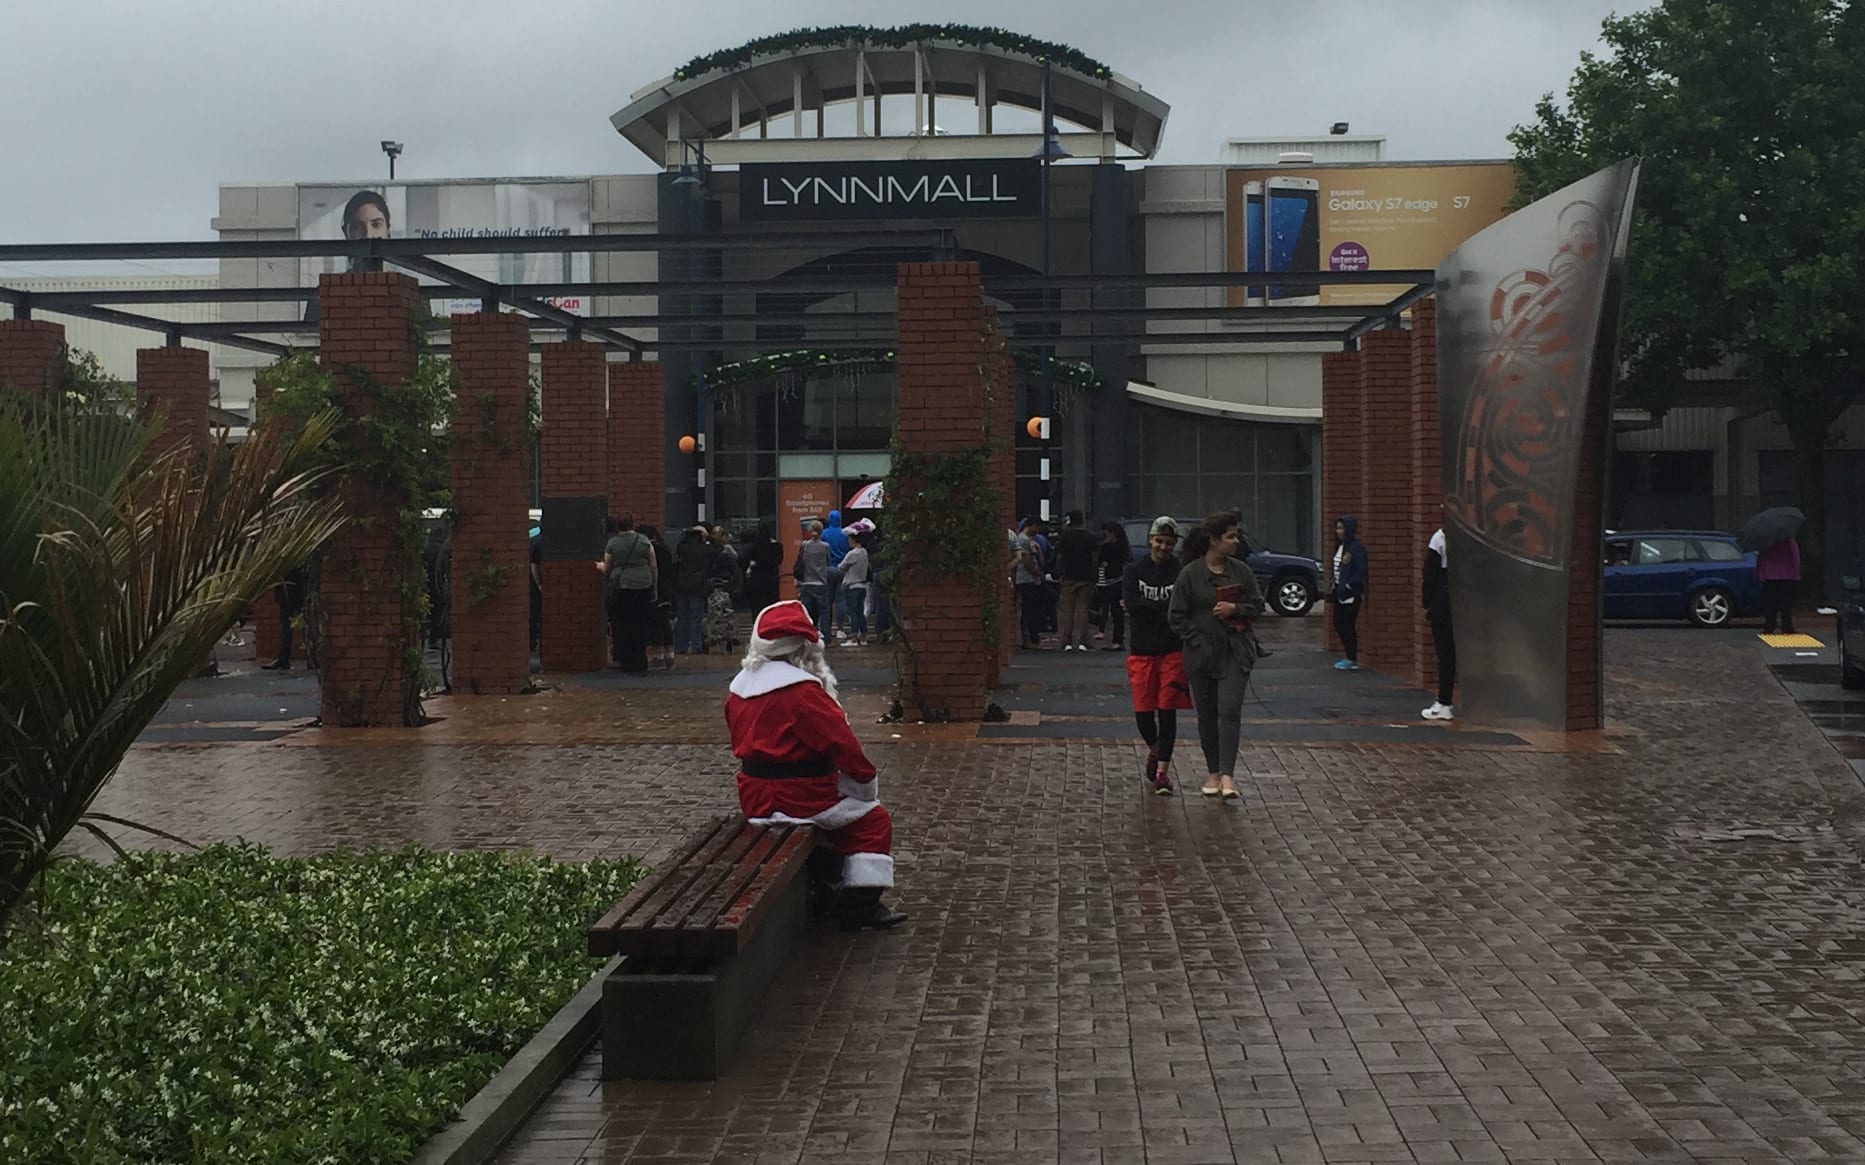 Santa was among those evacuated from Lynn Mall in New Lynn, Auckland